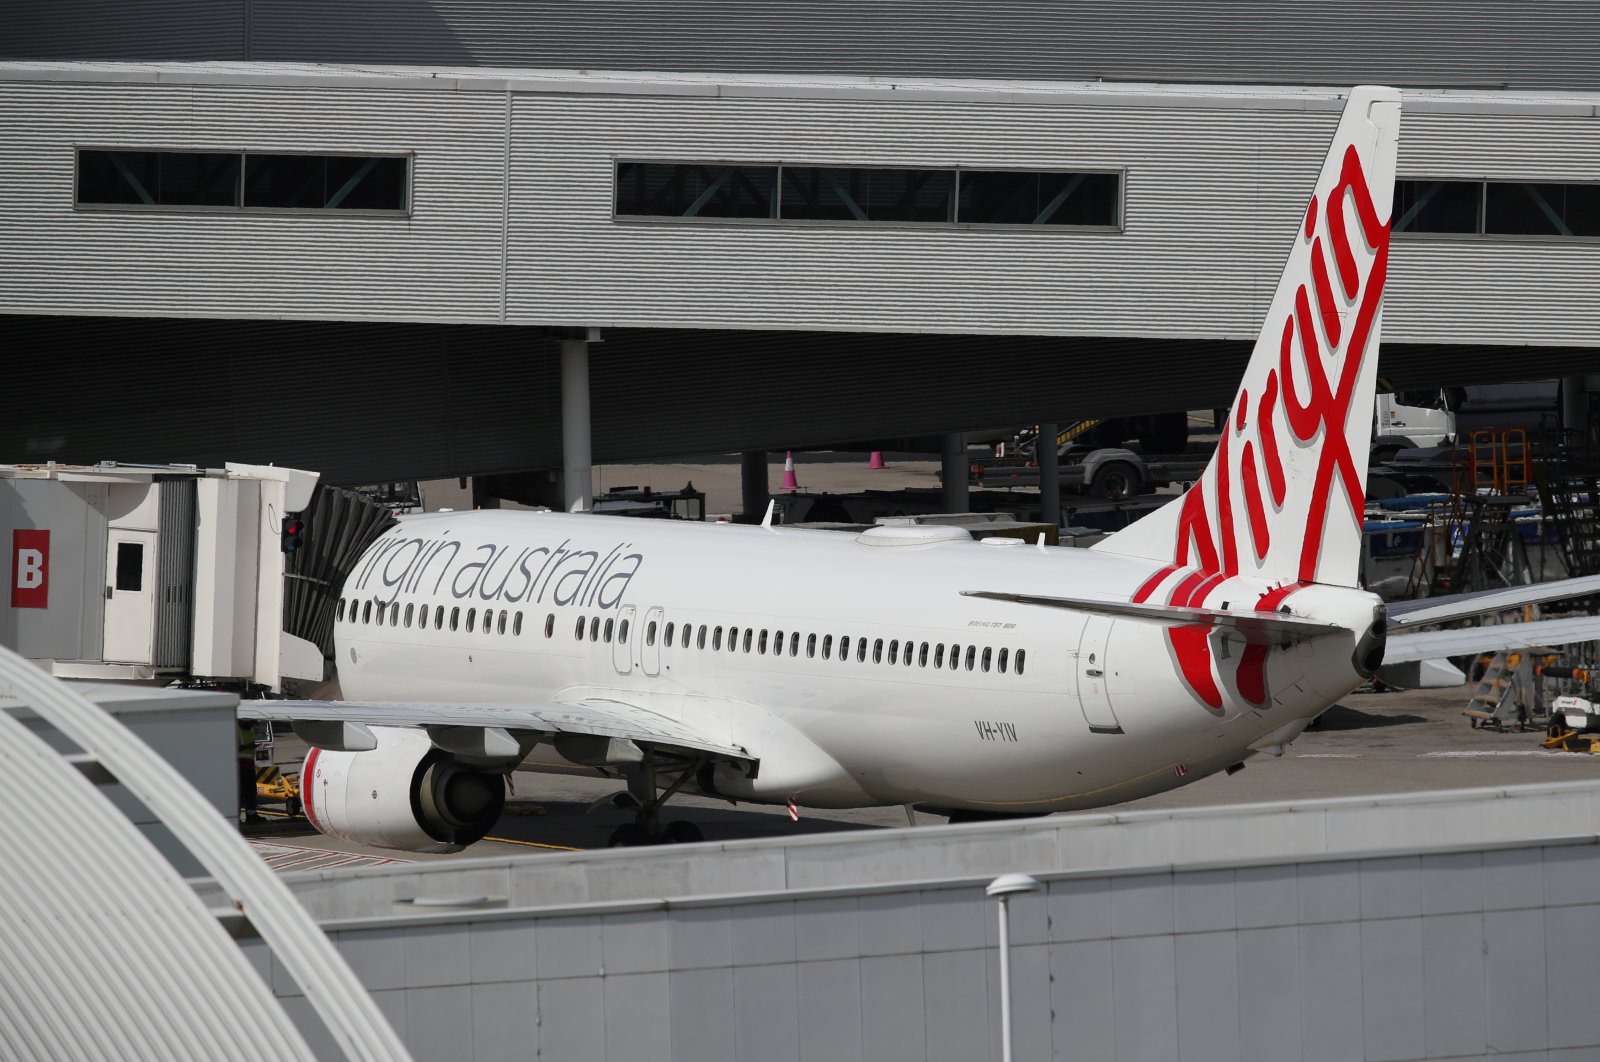 A Virgin Australia Airlines plane is seen at Kingsford Smith International Airport the morning after Australia implemented an entry ban on non-citizens and non-residents intended to curb the spread of the coronavirus disease (COVID-19) in Sydney, Australia, March 21, 2020. (Reuters File Photo)